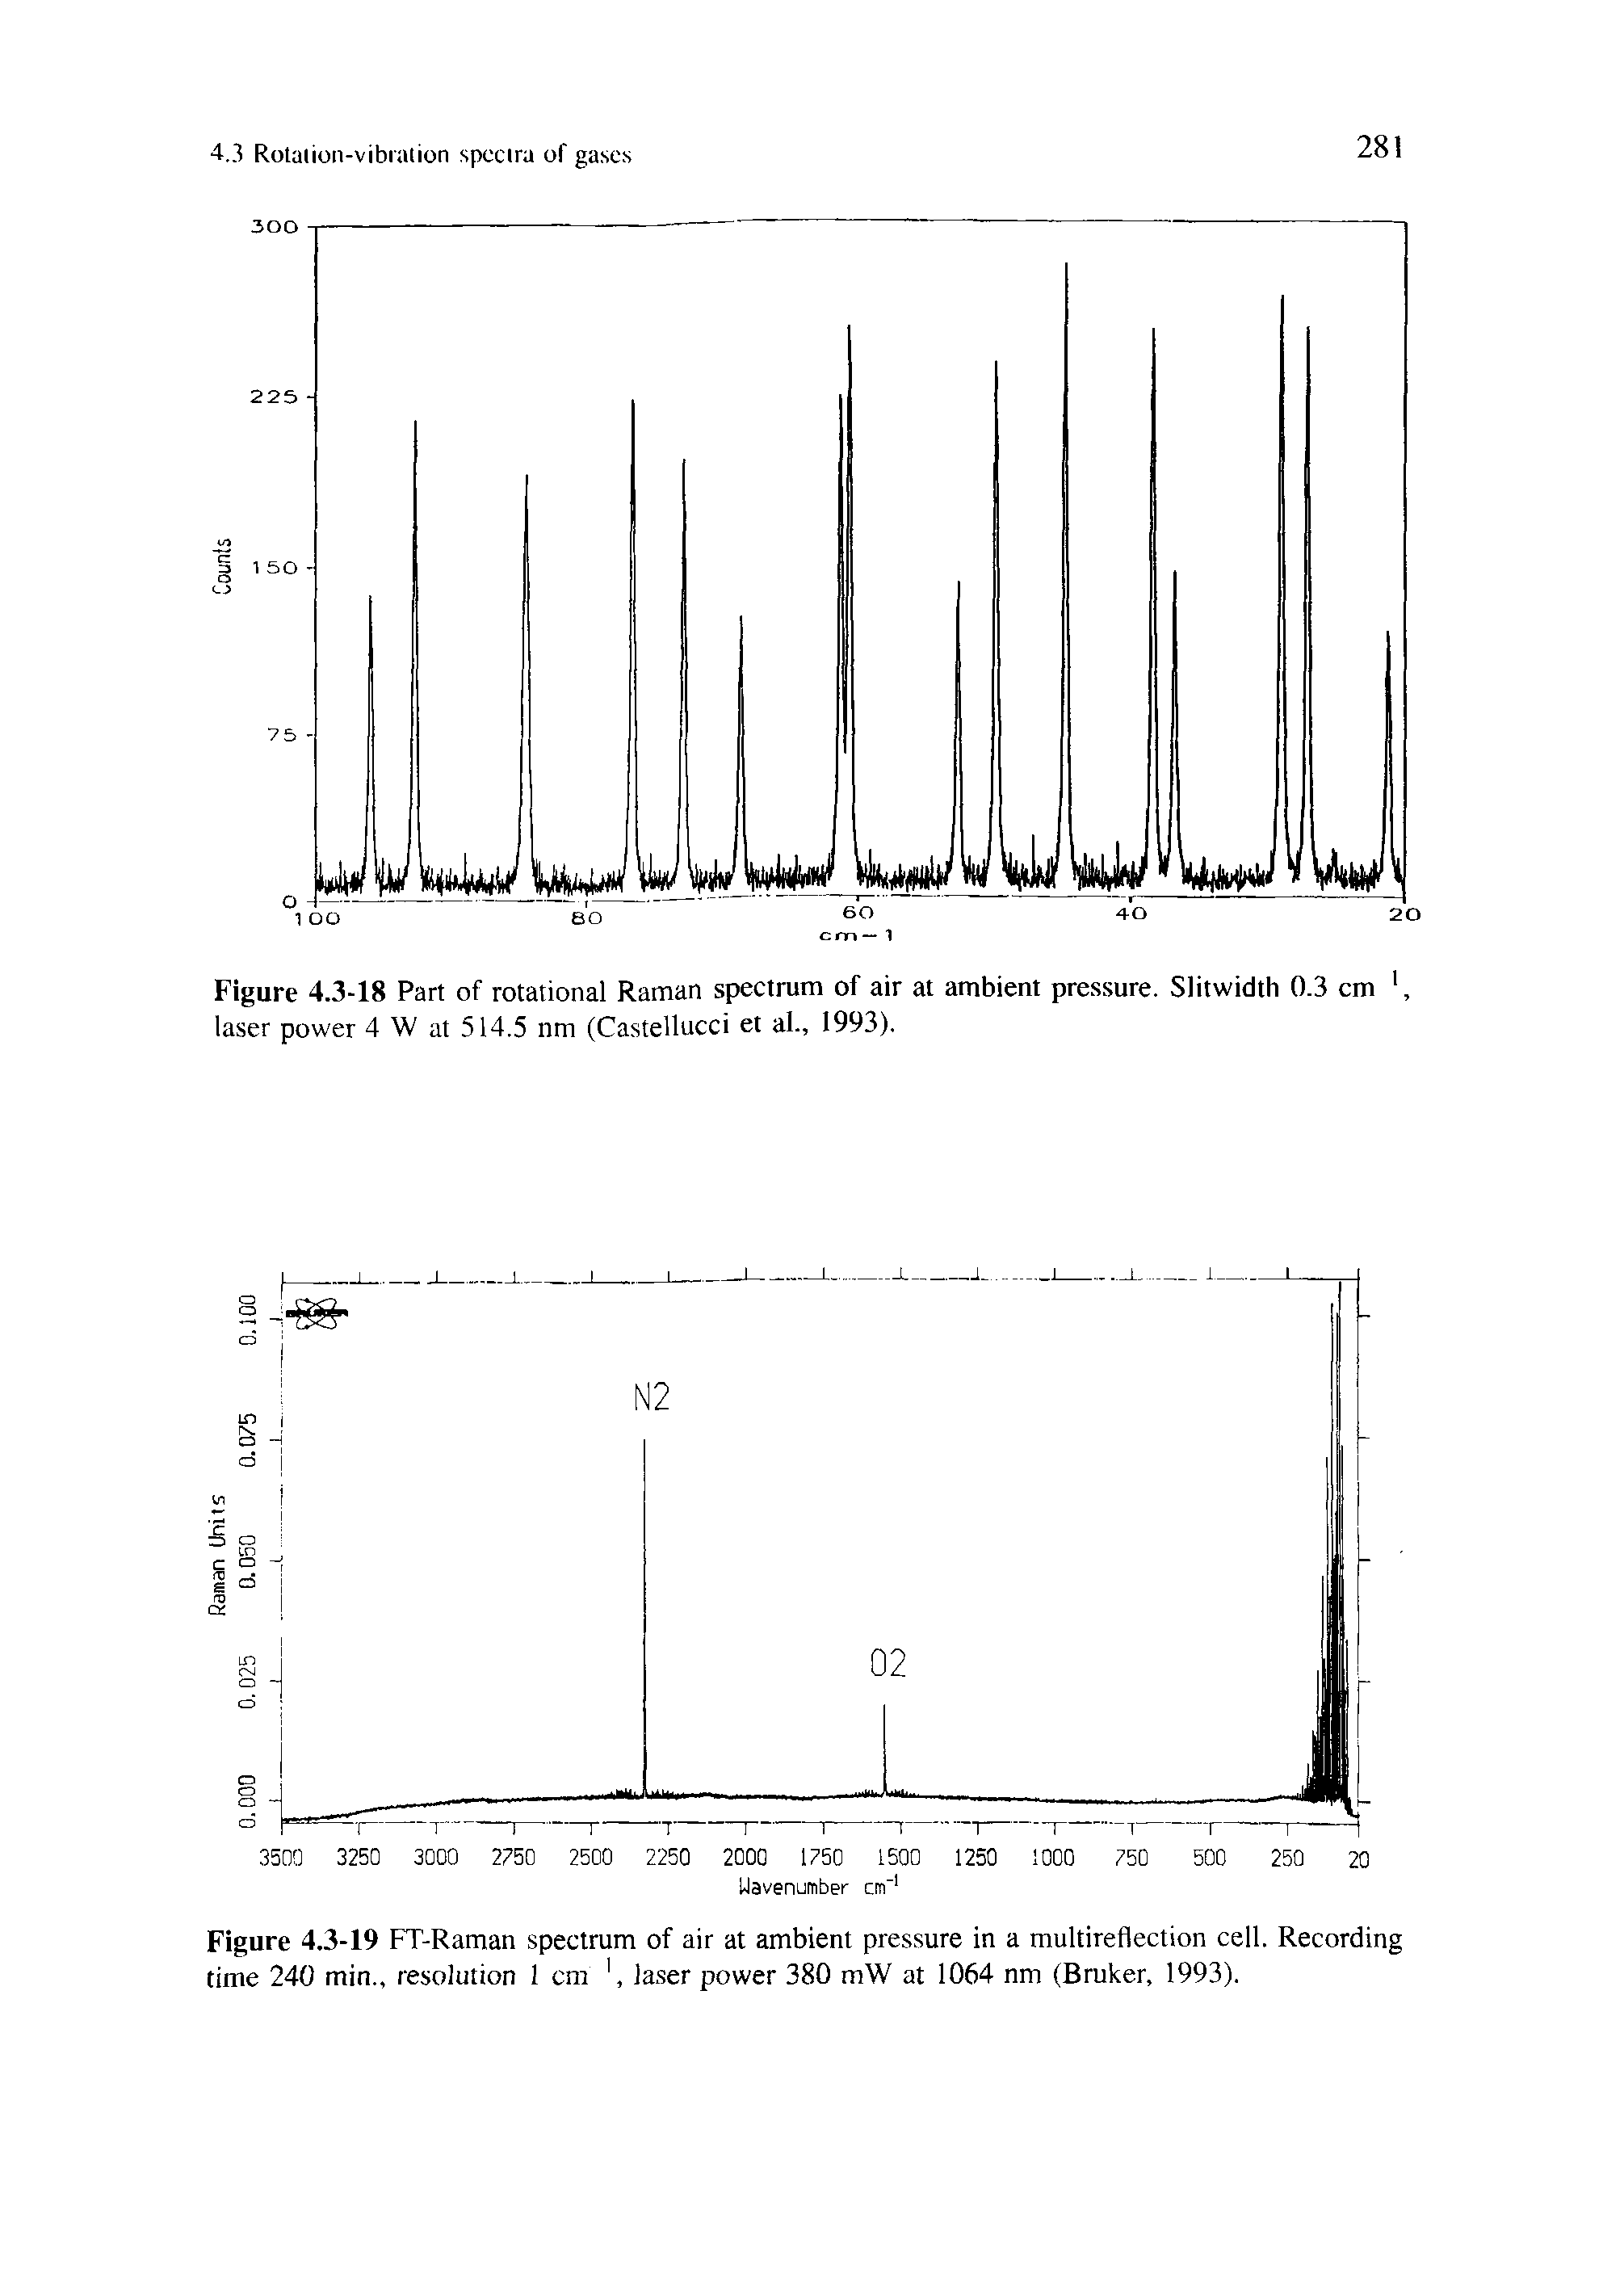 Figure 4.3-19 FT-Raman spectrum of air at ambient pressure in a multireflection cell. Recording time 240 min., resolution 1 cm ia.ser power 380 mW at 1064 nm (Bruker, 1993).